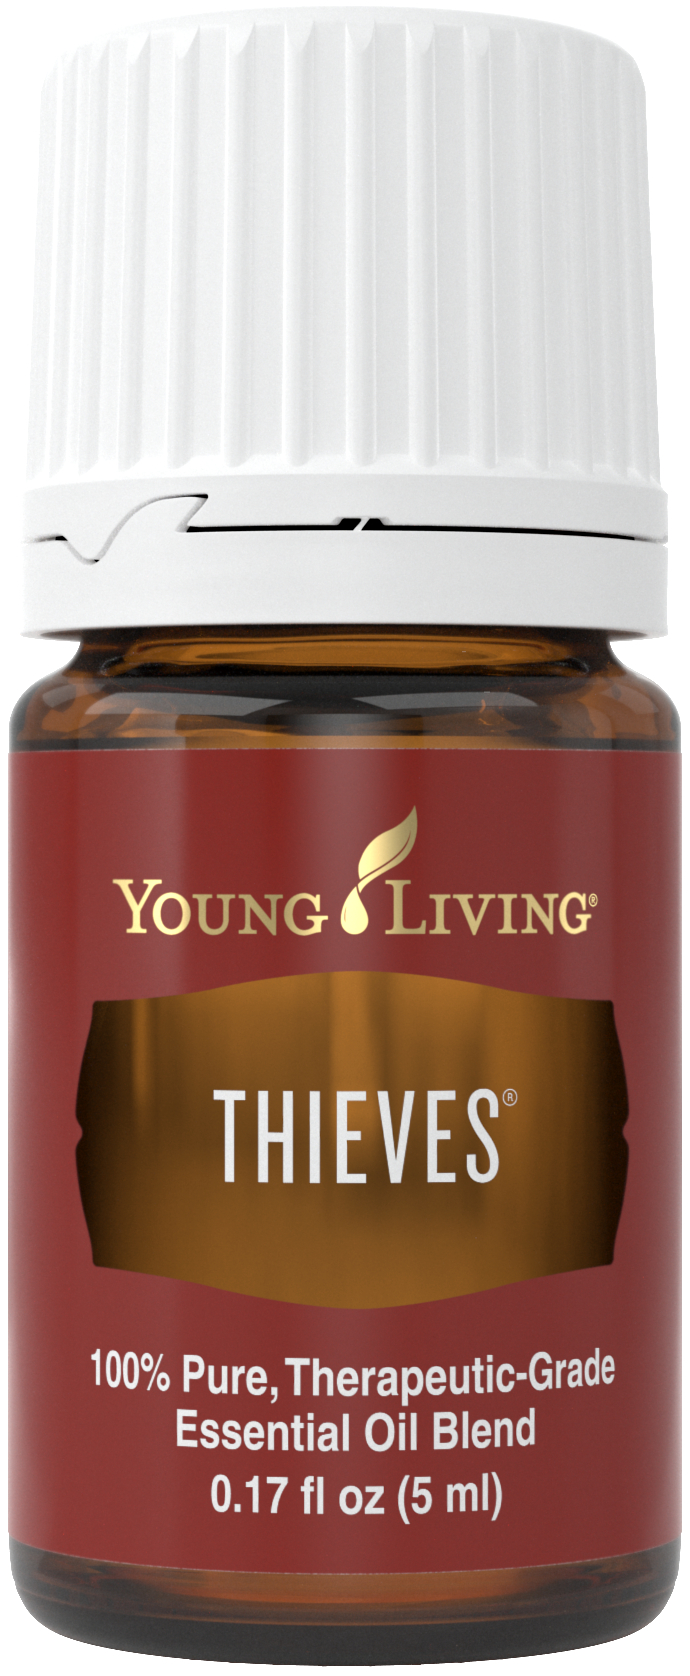 How to use Thieves Essential Oil | Young Living Blog